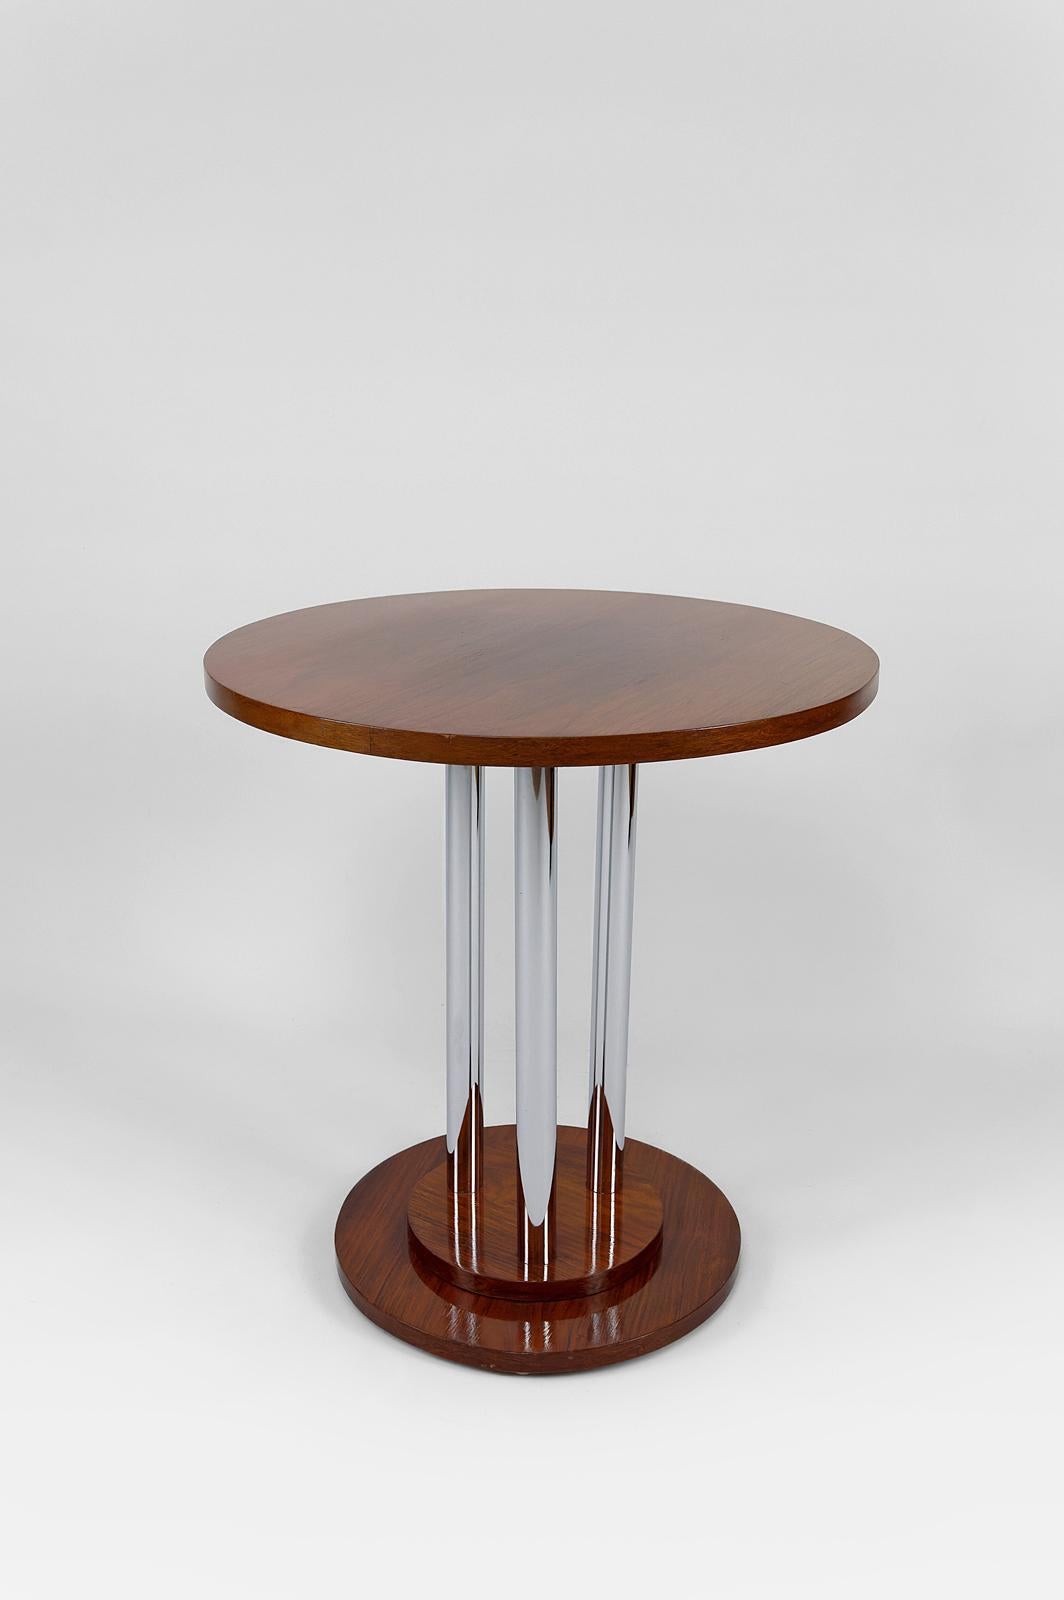 Modernist Art Deco pedestal table in walnut and chrome, France, Circa 1930 For Sale 1